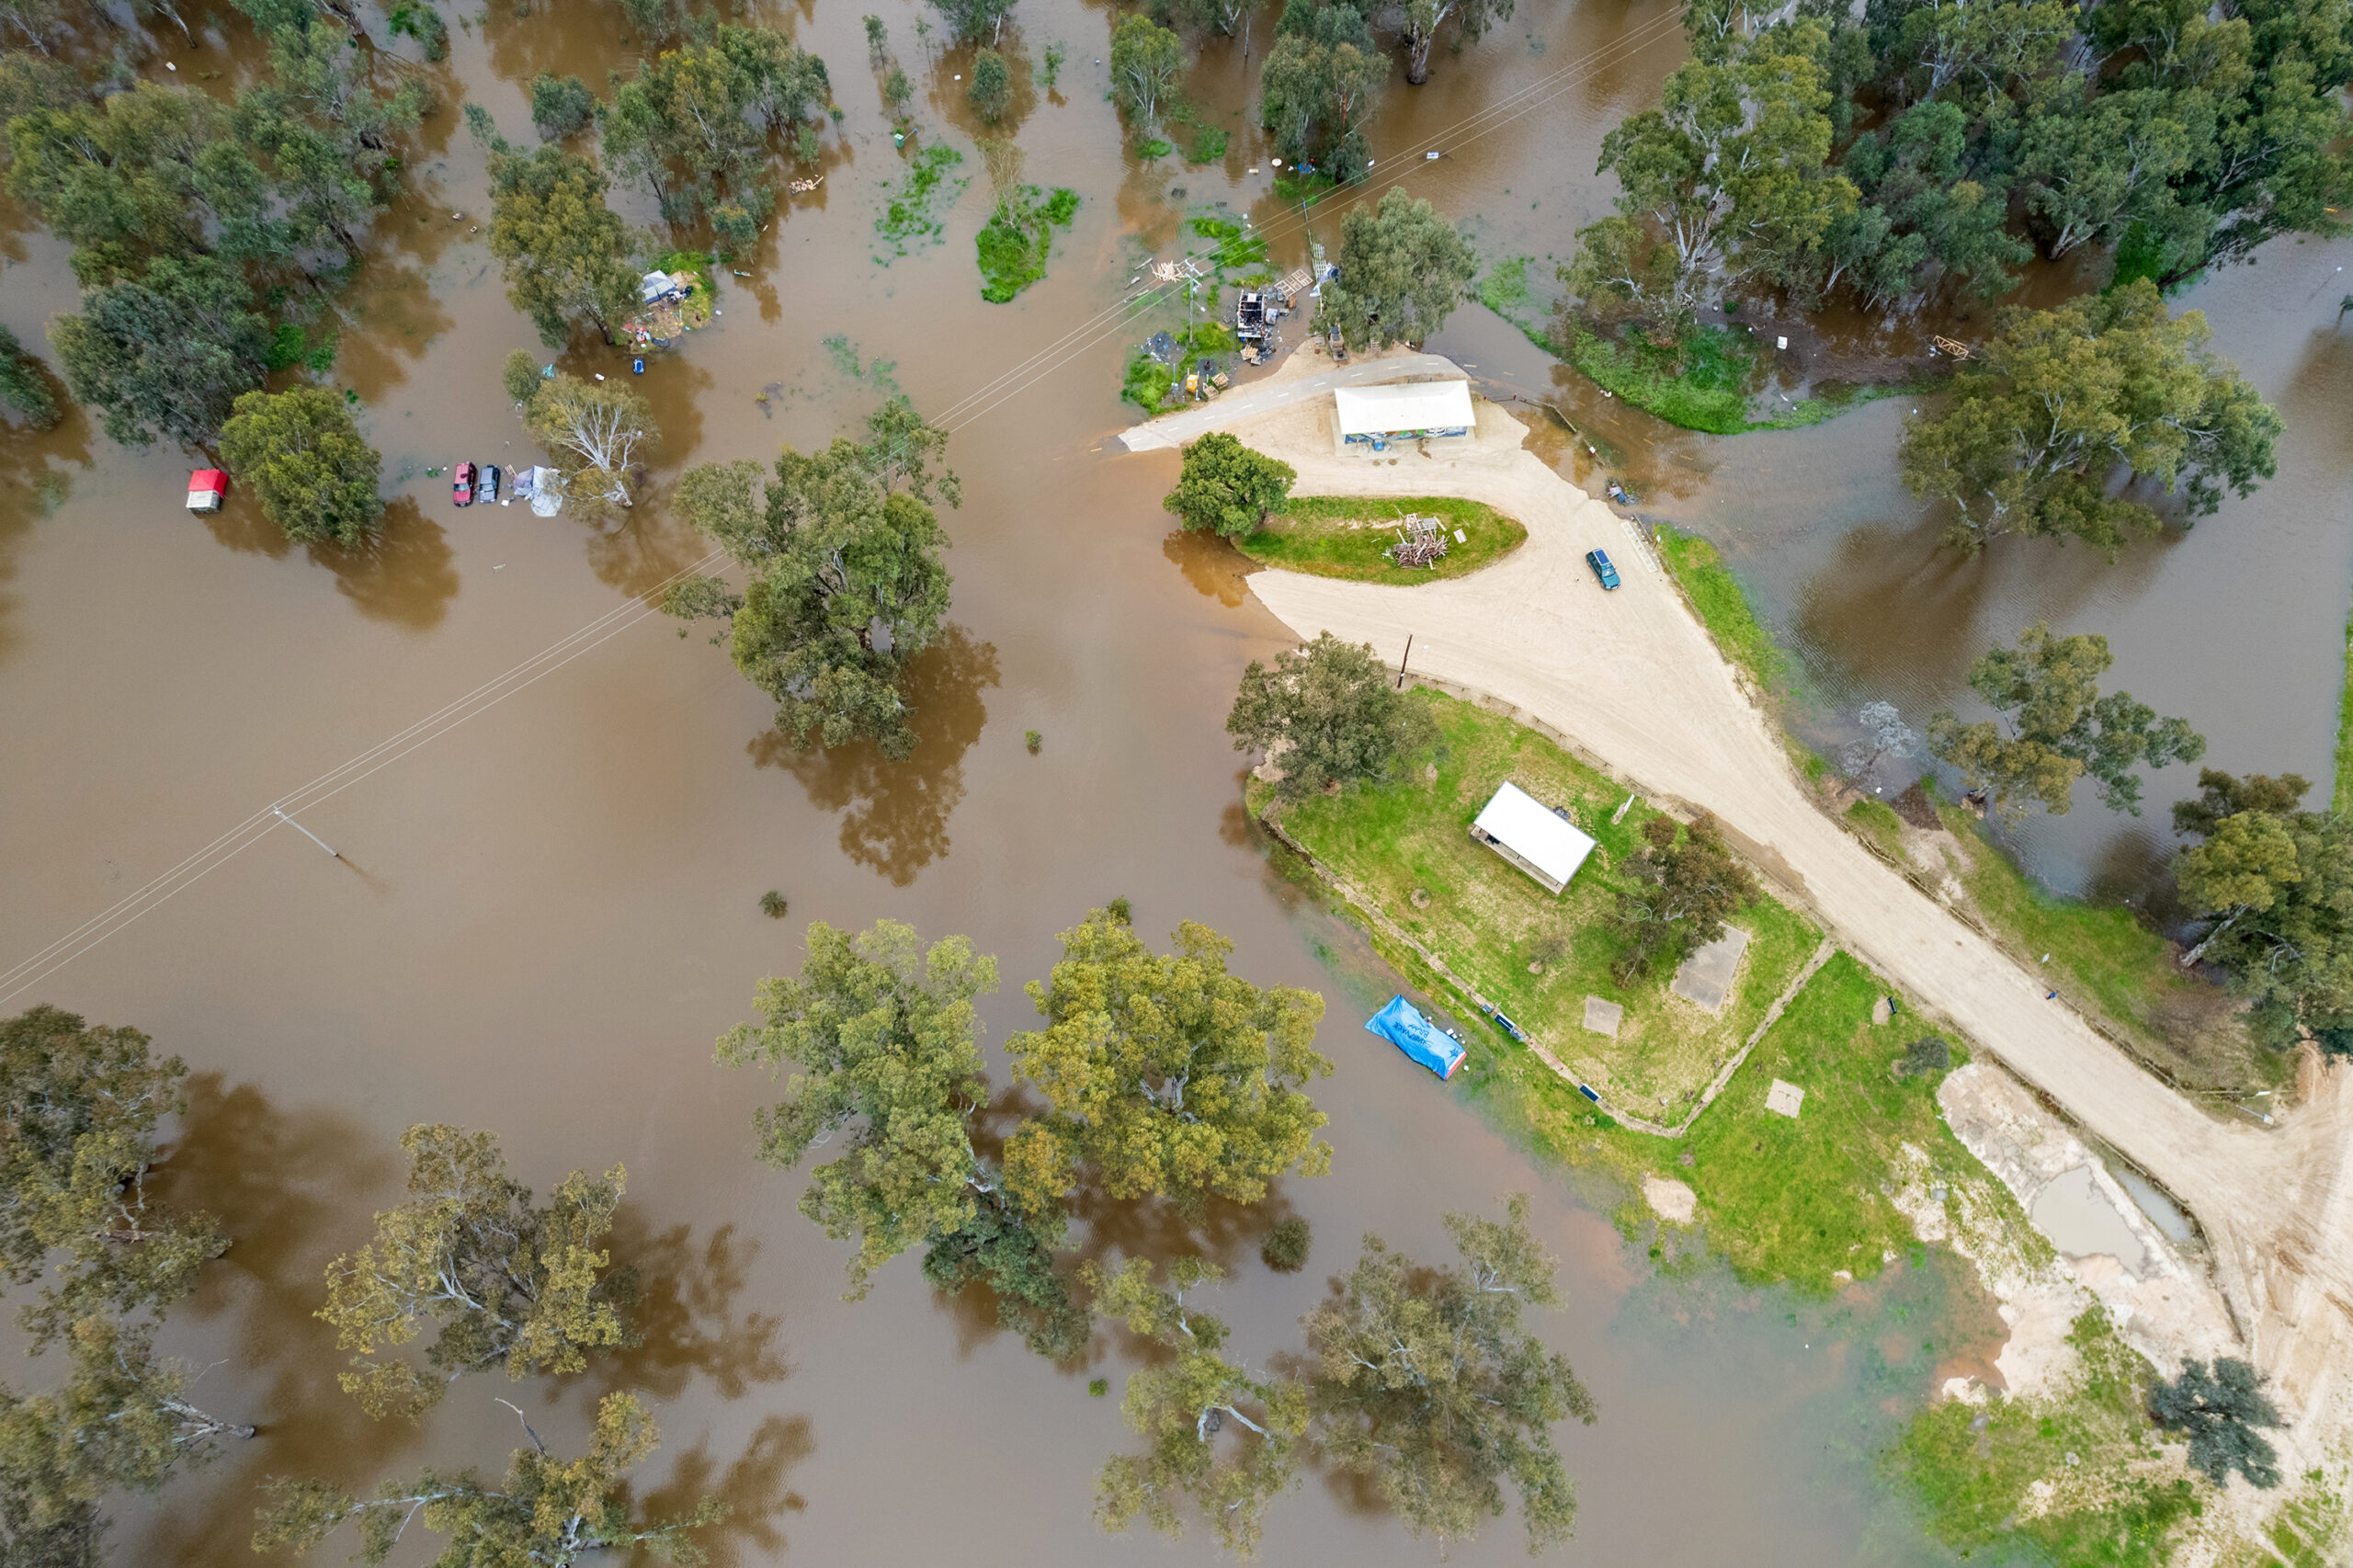 Aerial view of homeless tents and vehicles inundated at Wilks Park, Wagga Wagga New South Wales, Australia, on 12 October 2022. Photo: Robert Myers / Wikimedia Commons